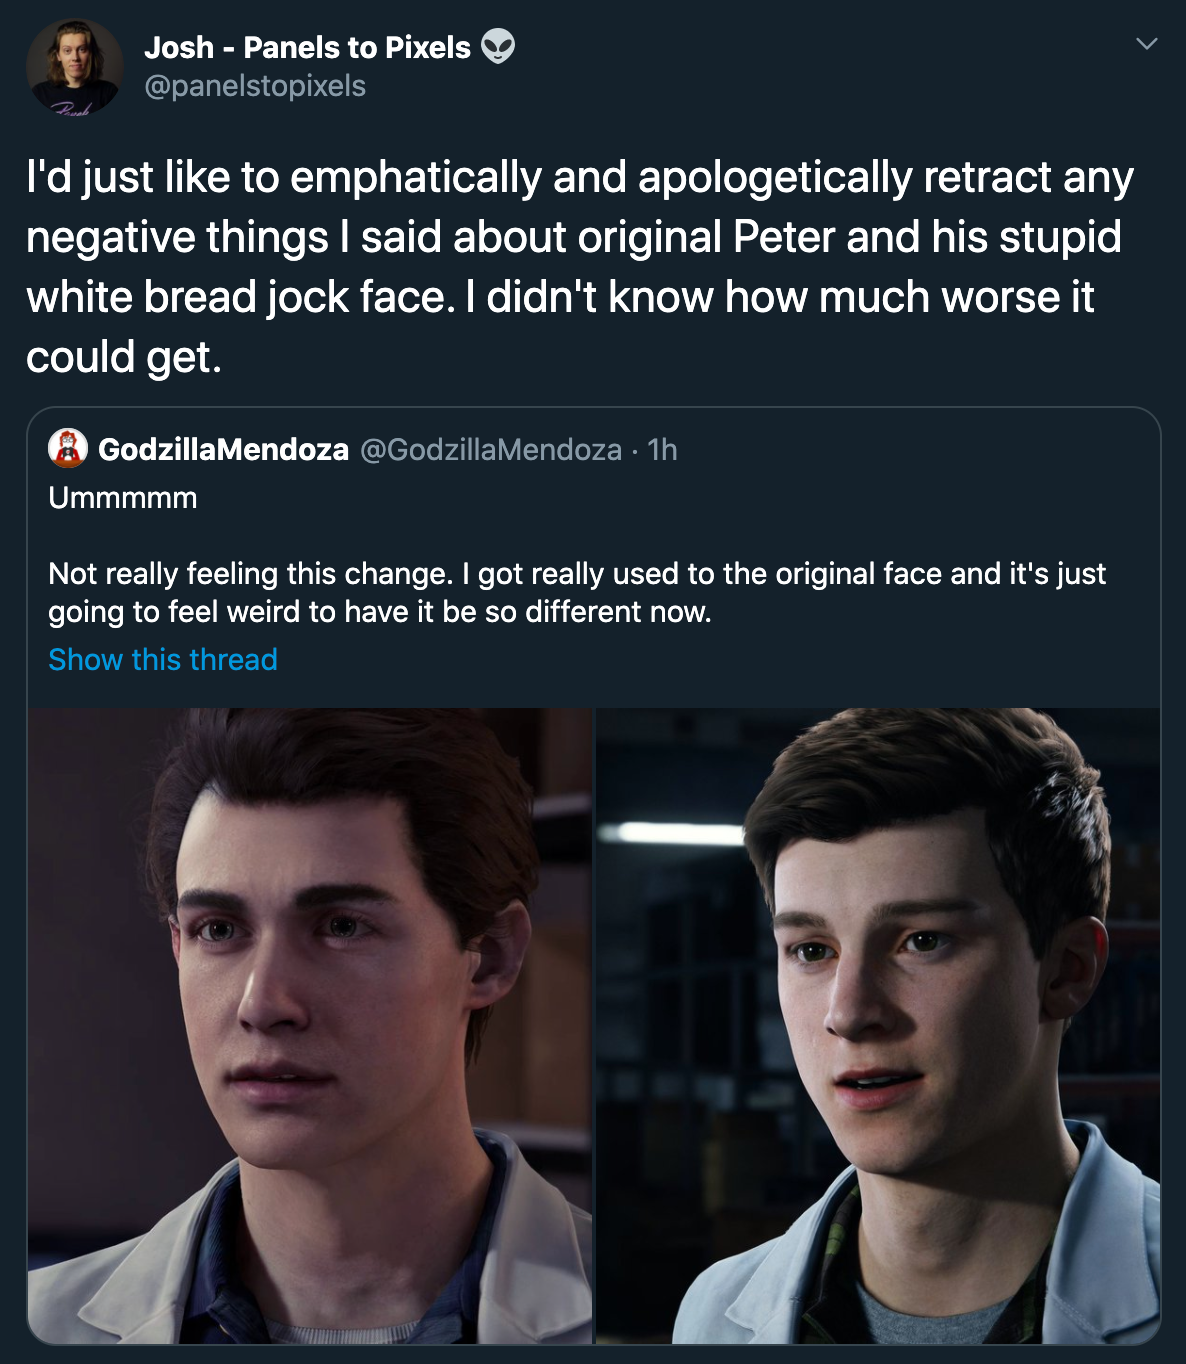 I'd just like to emphatically and apologetically retract any negative things I said about original Peter and his stupid white bread jock face. I didn't know how much worse it could get